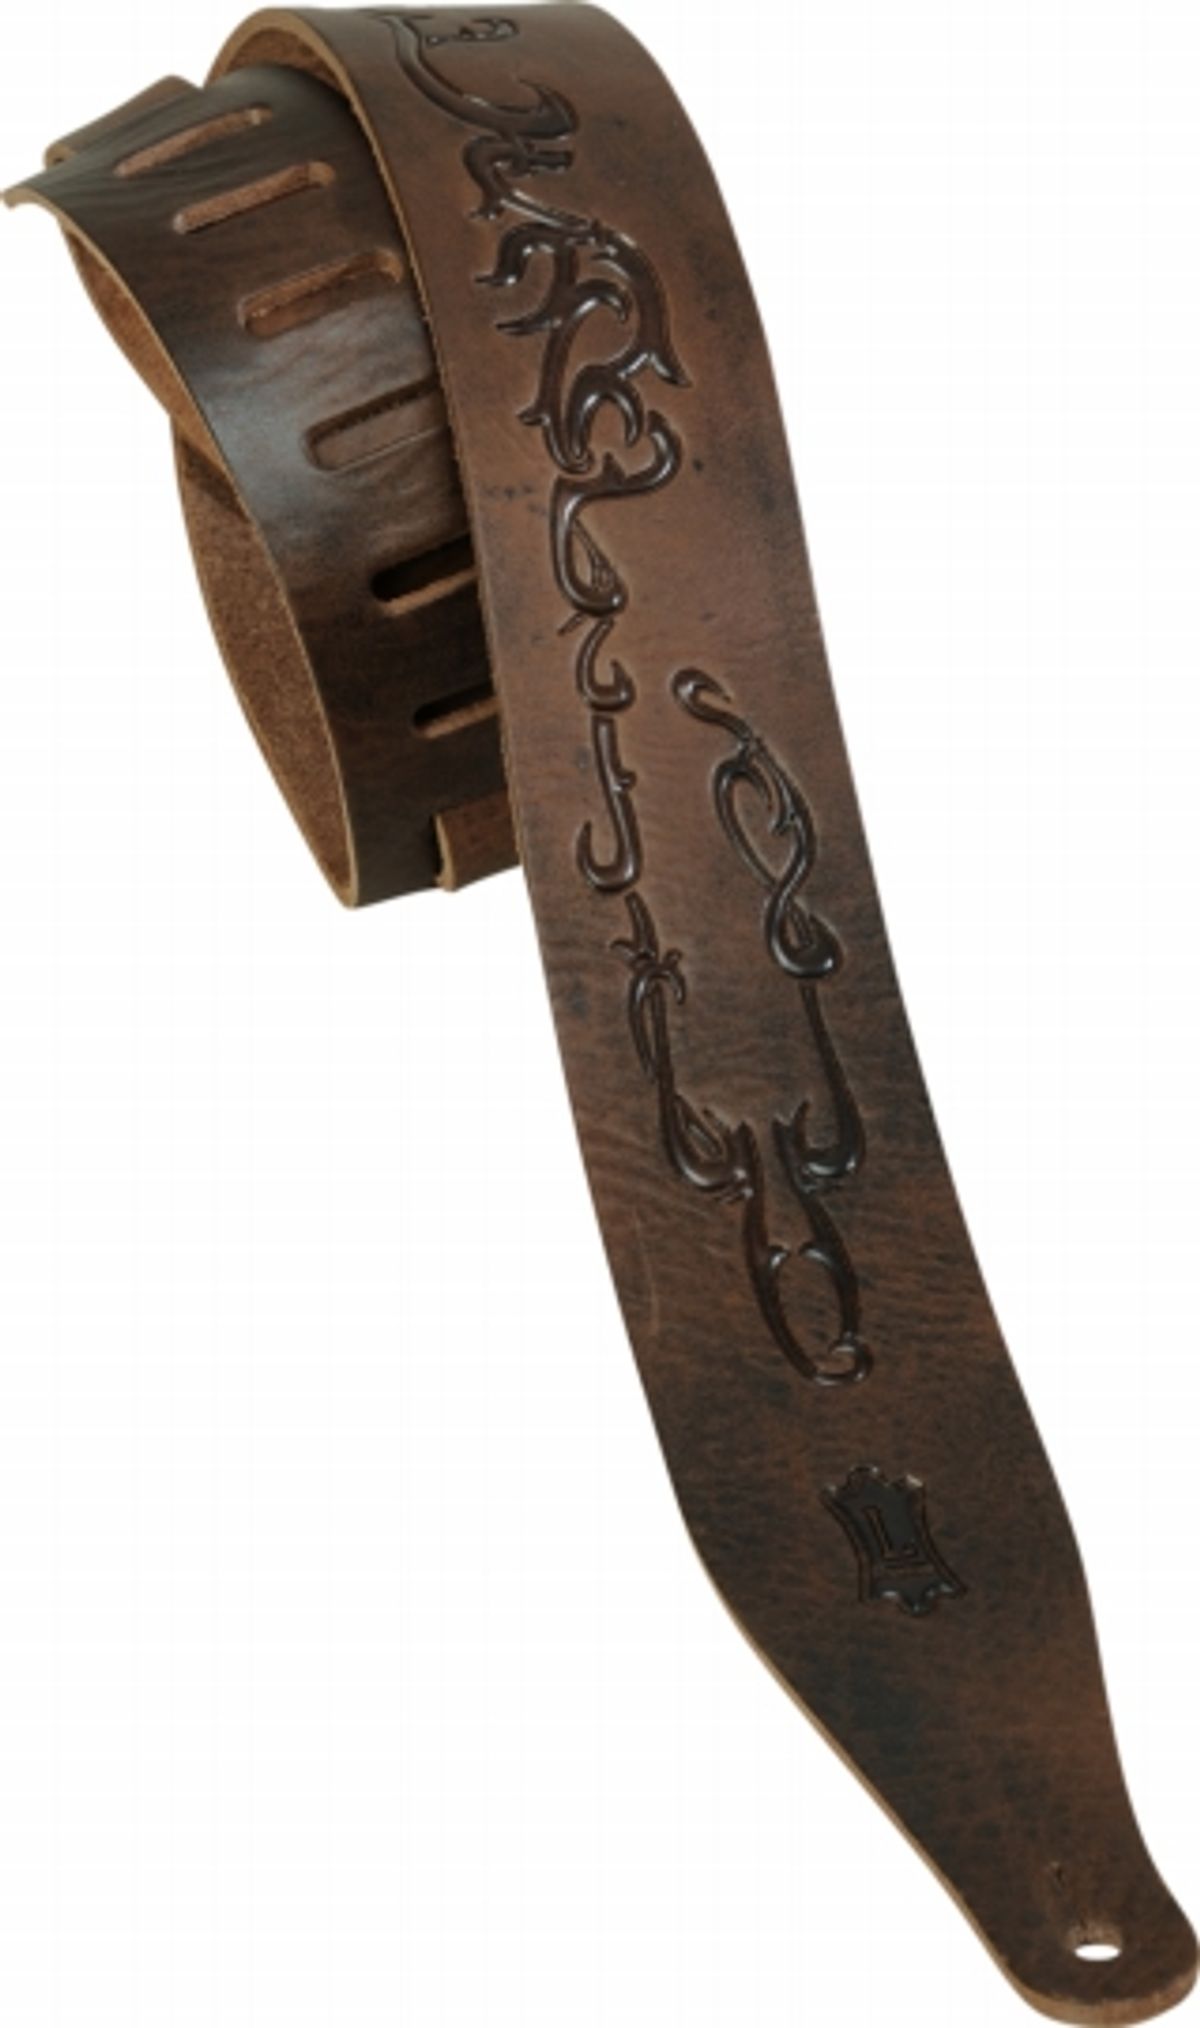 Levy's Leathers Introduces Distressed Leather Guitar Strap